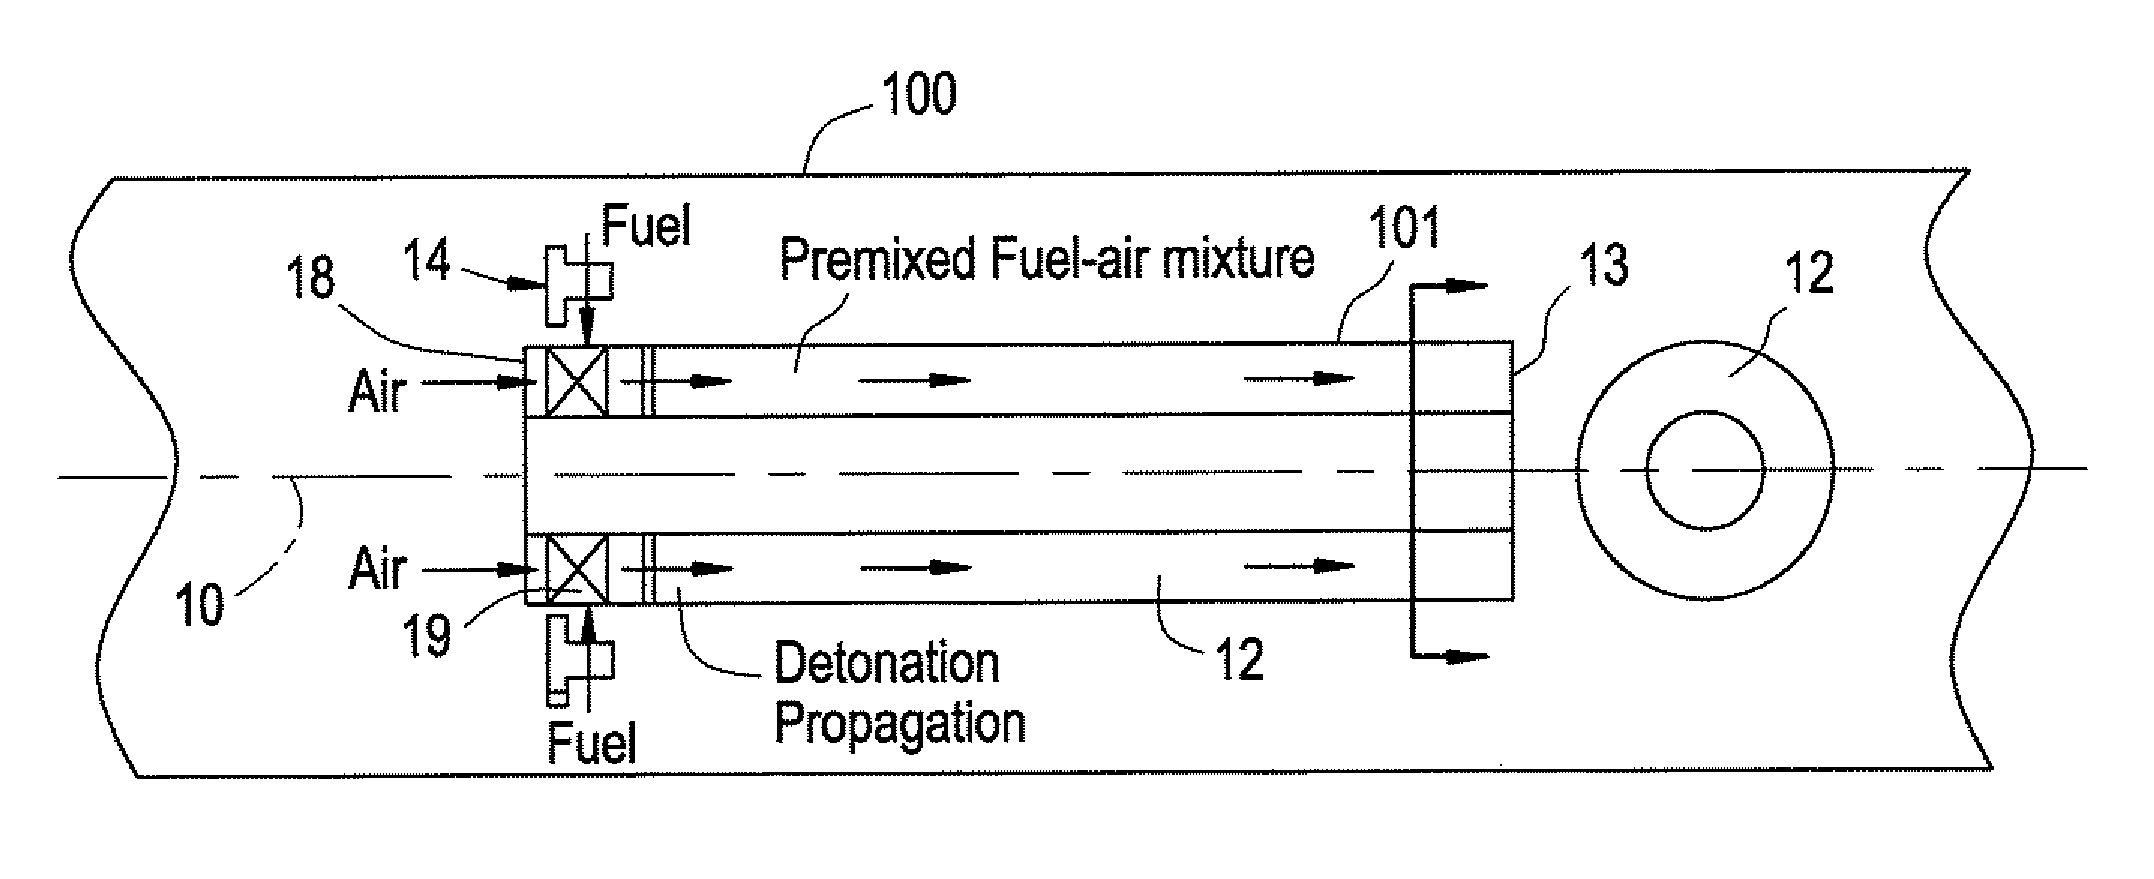 Dual mode combustion operation of a pulse detonation combustor in a hybrid engine